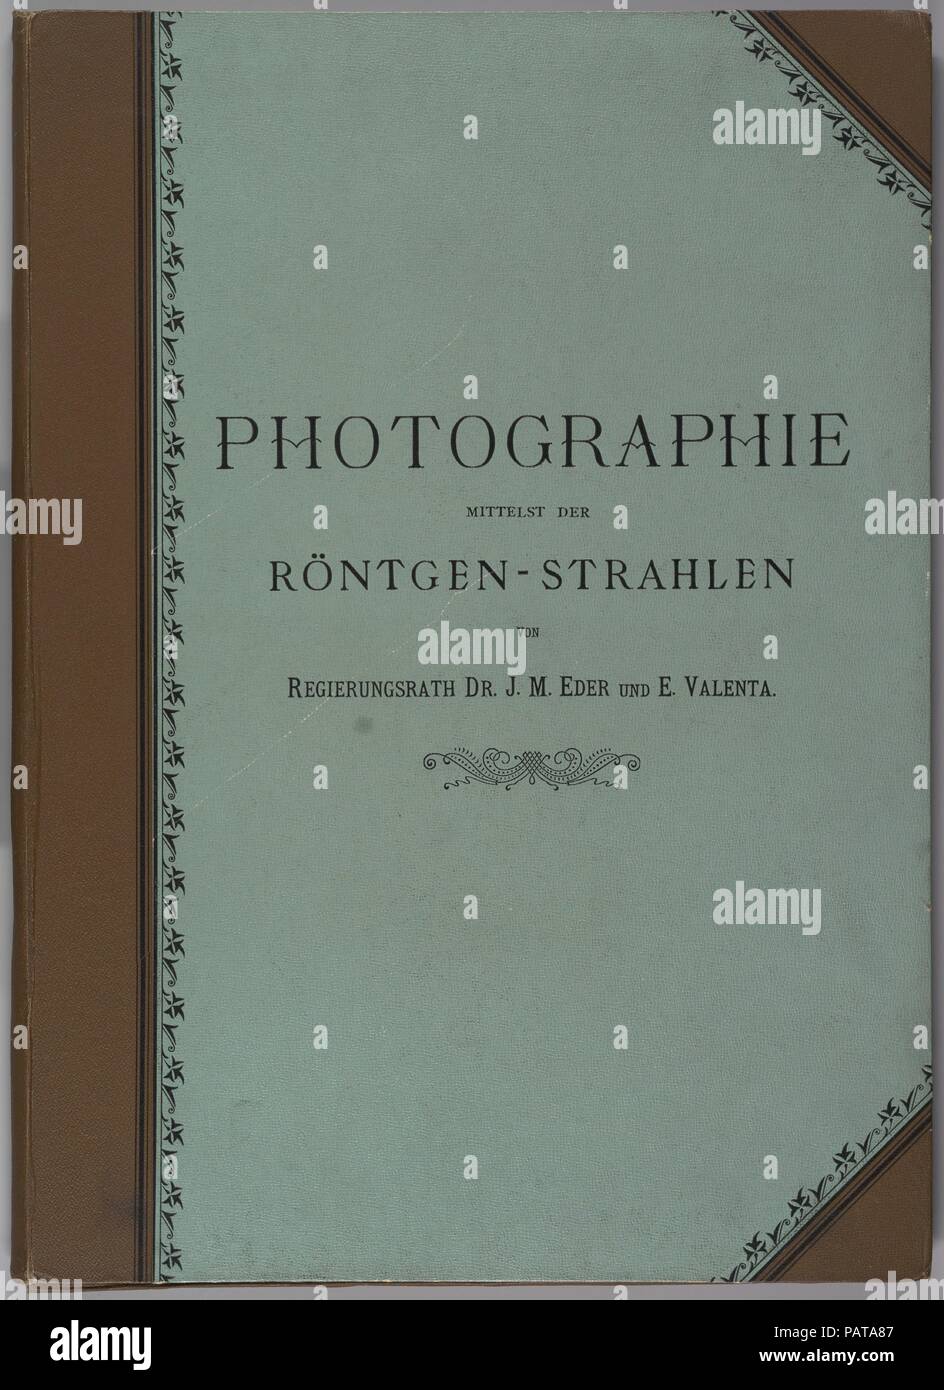 Versuche über Photographie mittelst der Röntgen'schen Strahlen. Artist: Josef Maria Eder (Austrian, Krems an der Donau, 1855-1944 Kitzbühel); Eduard Valenta (Austrian, 1857-1937). Dimensions: 50 x 36 cm (19 11/16 x 14 3/16 in.). Date: 1896.  Eder was the director of an institute for graphic processes and the author of an early history of photography. With the photochemist Valenta, he produced a portfolio in January 1896, less than a month after Wilhelm Conrad Röntgen published his discovery of X-rays. Eder and Valenta's volume, from which this plate derives, demonstrated the X-ray's magical ab Stock Photo